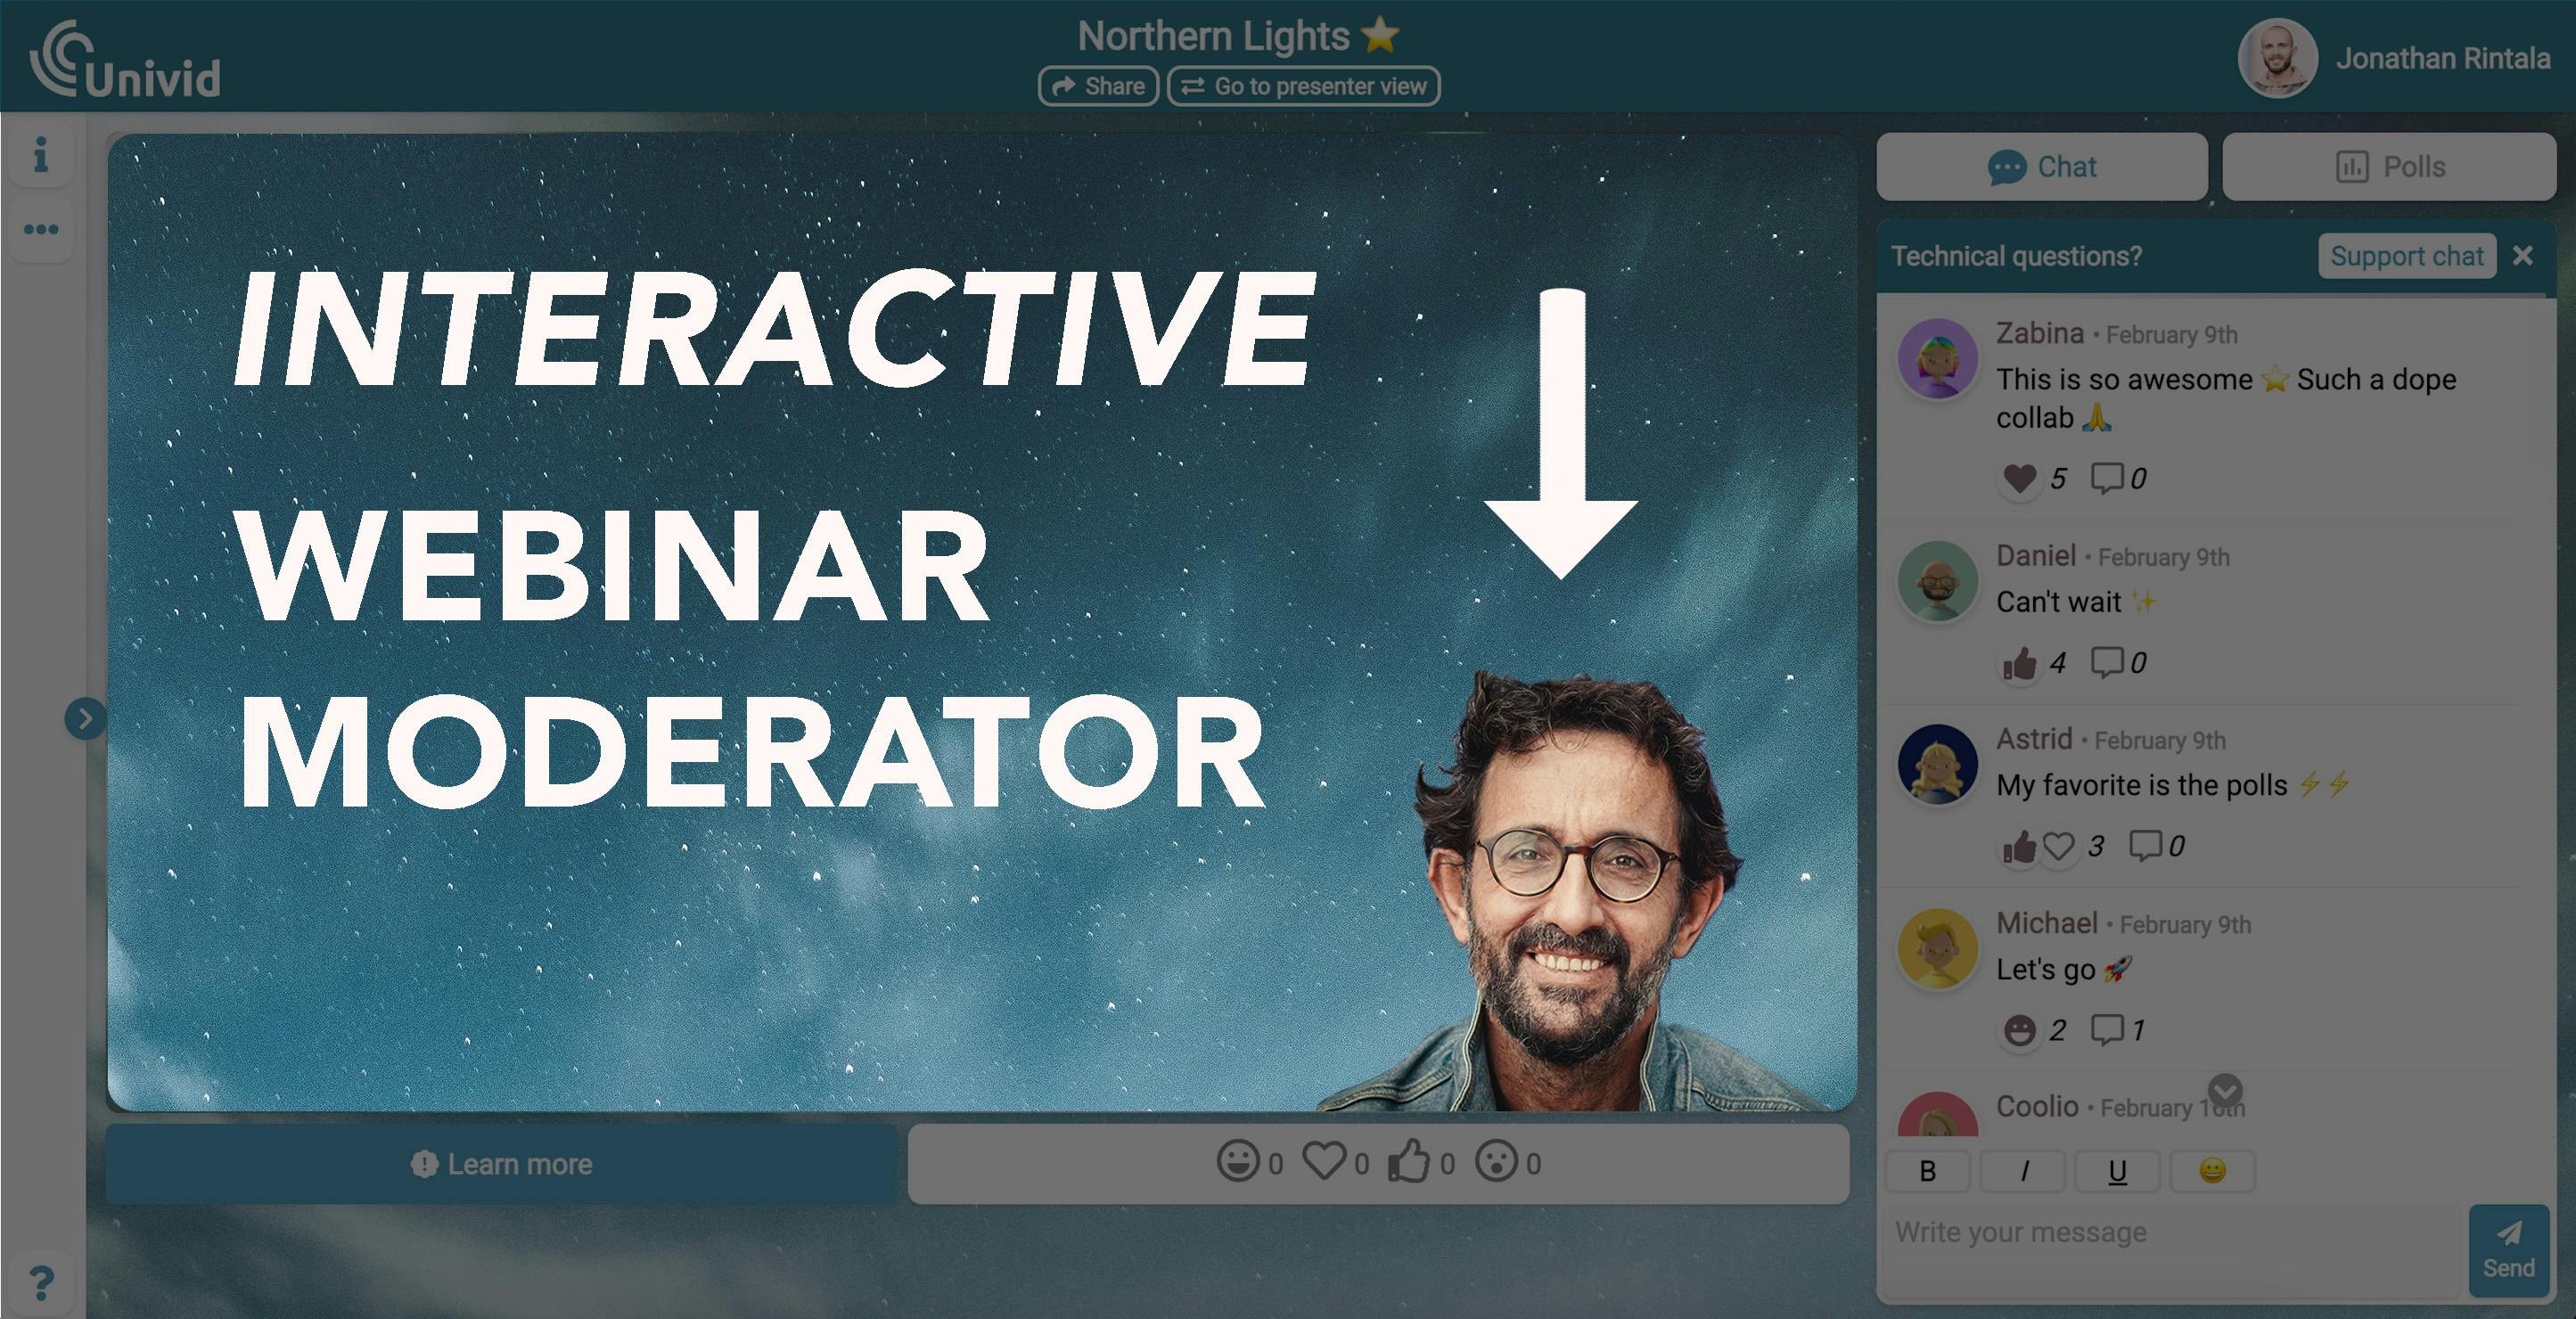 Create interactive webinars that your participants will remember with these 5 proven tips for interaction. Become a fun and engaging moderator today.